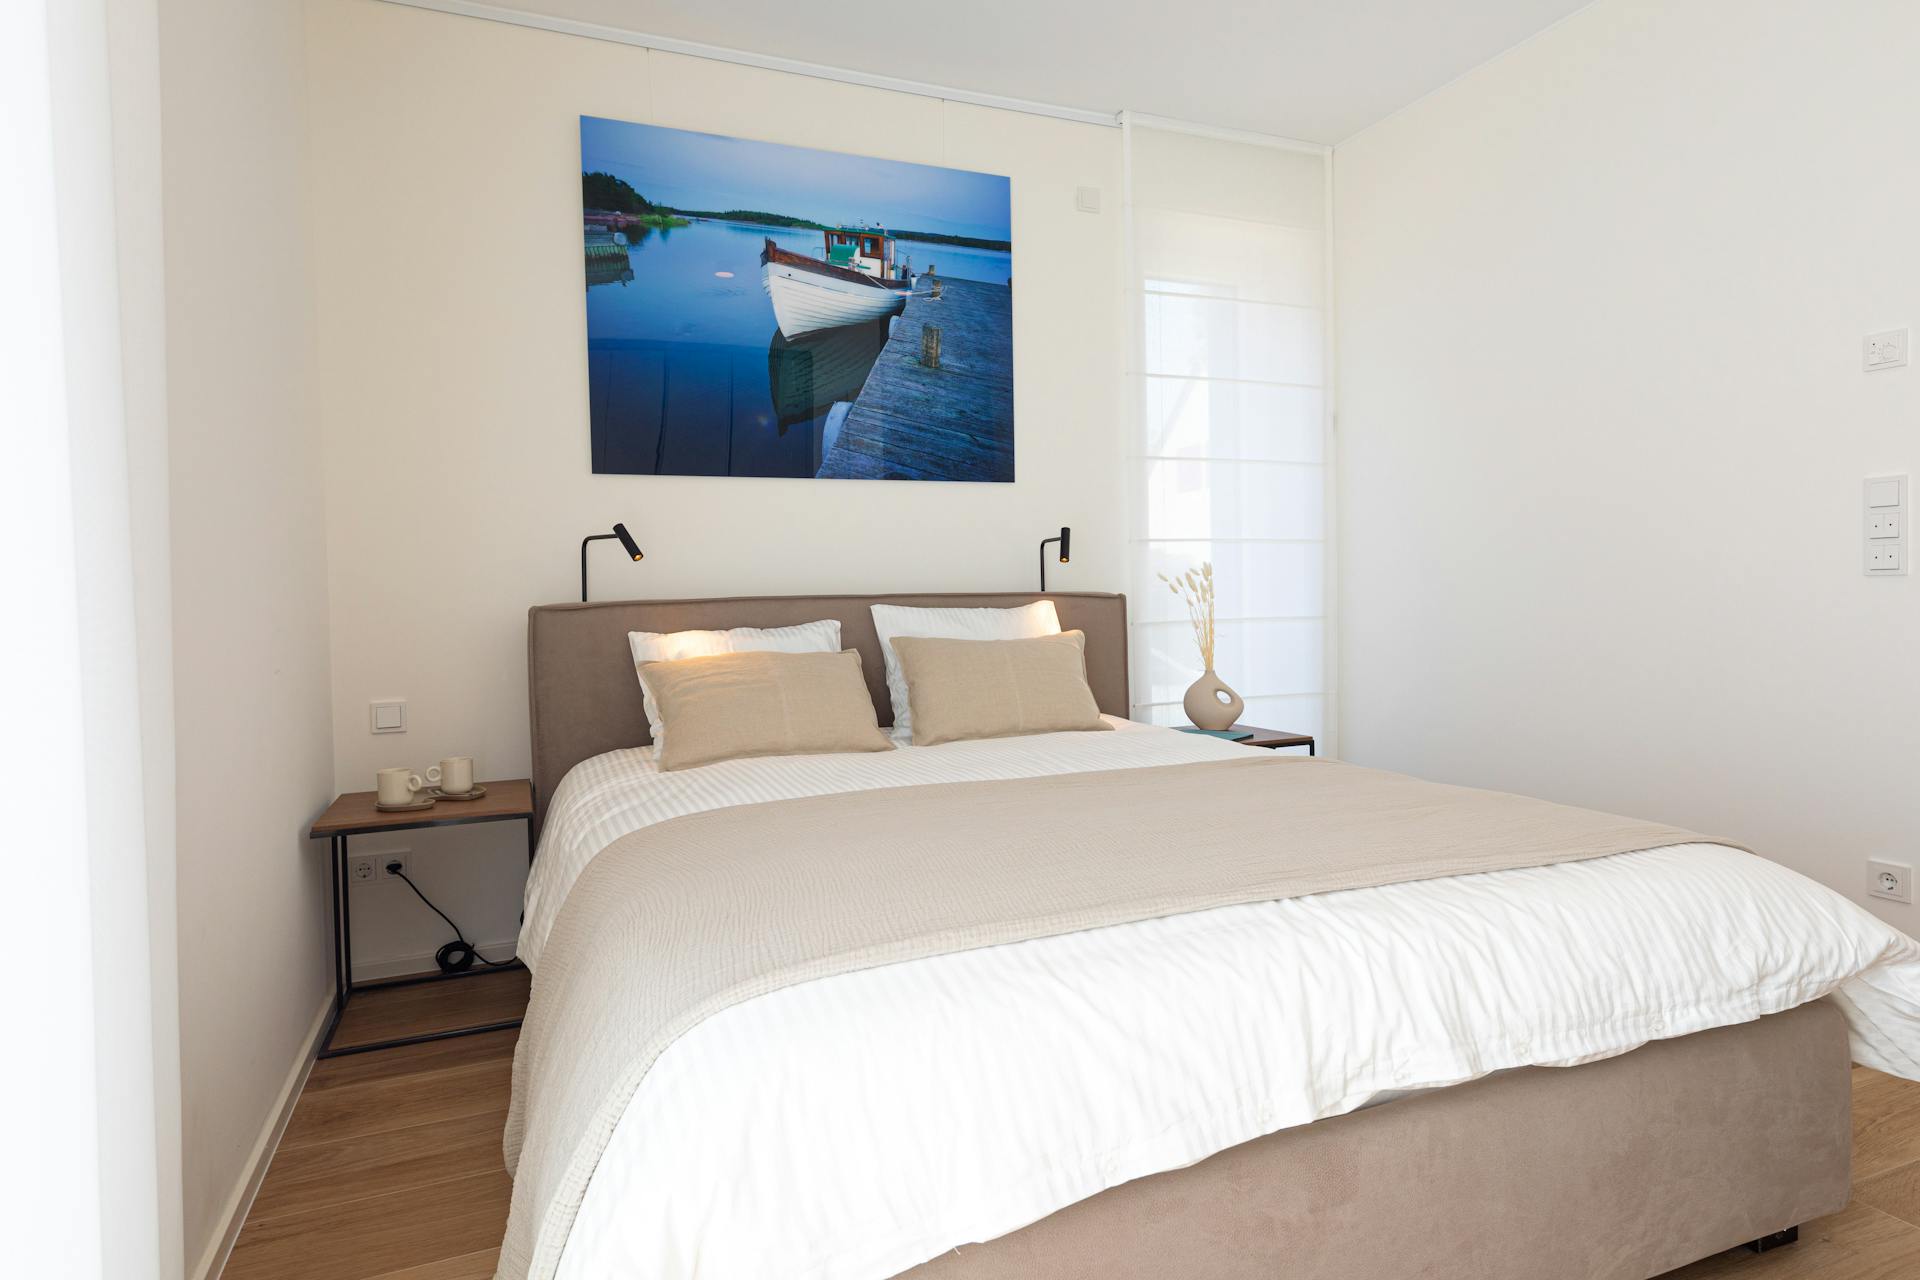 Bedroom with a large bed and white sheets and cushions, flanked by two lamps and nightstands. Hanging on the wall is a big picture with a fishing boat on water.